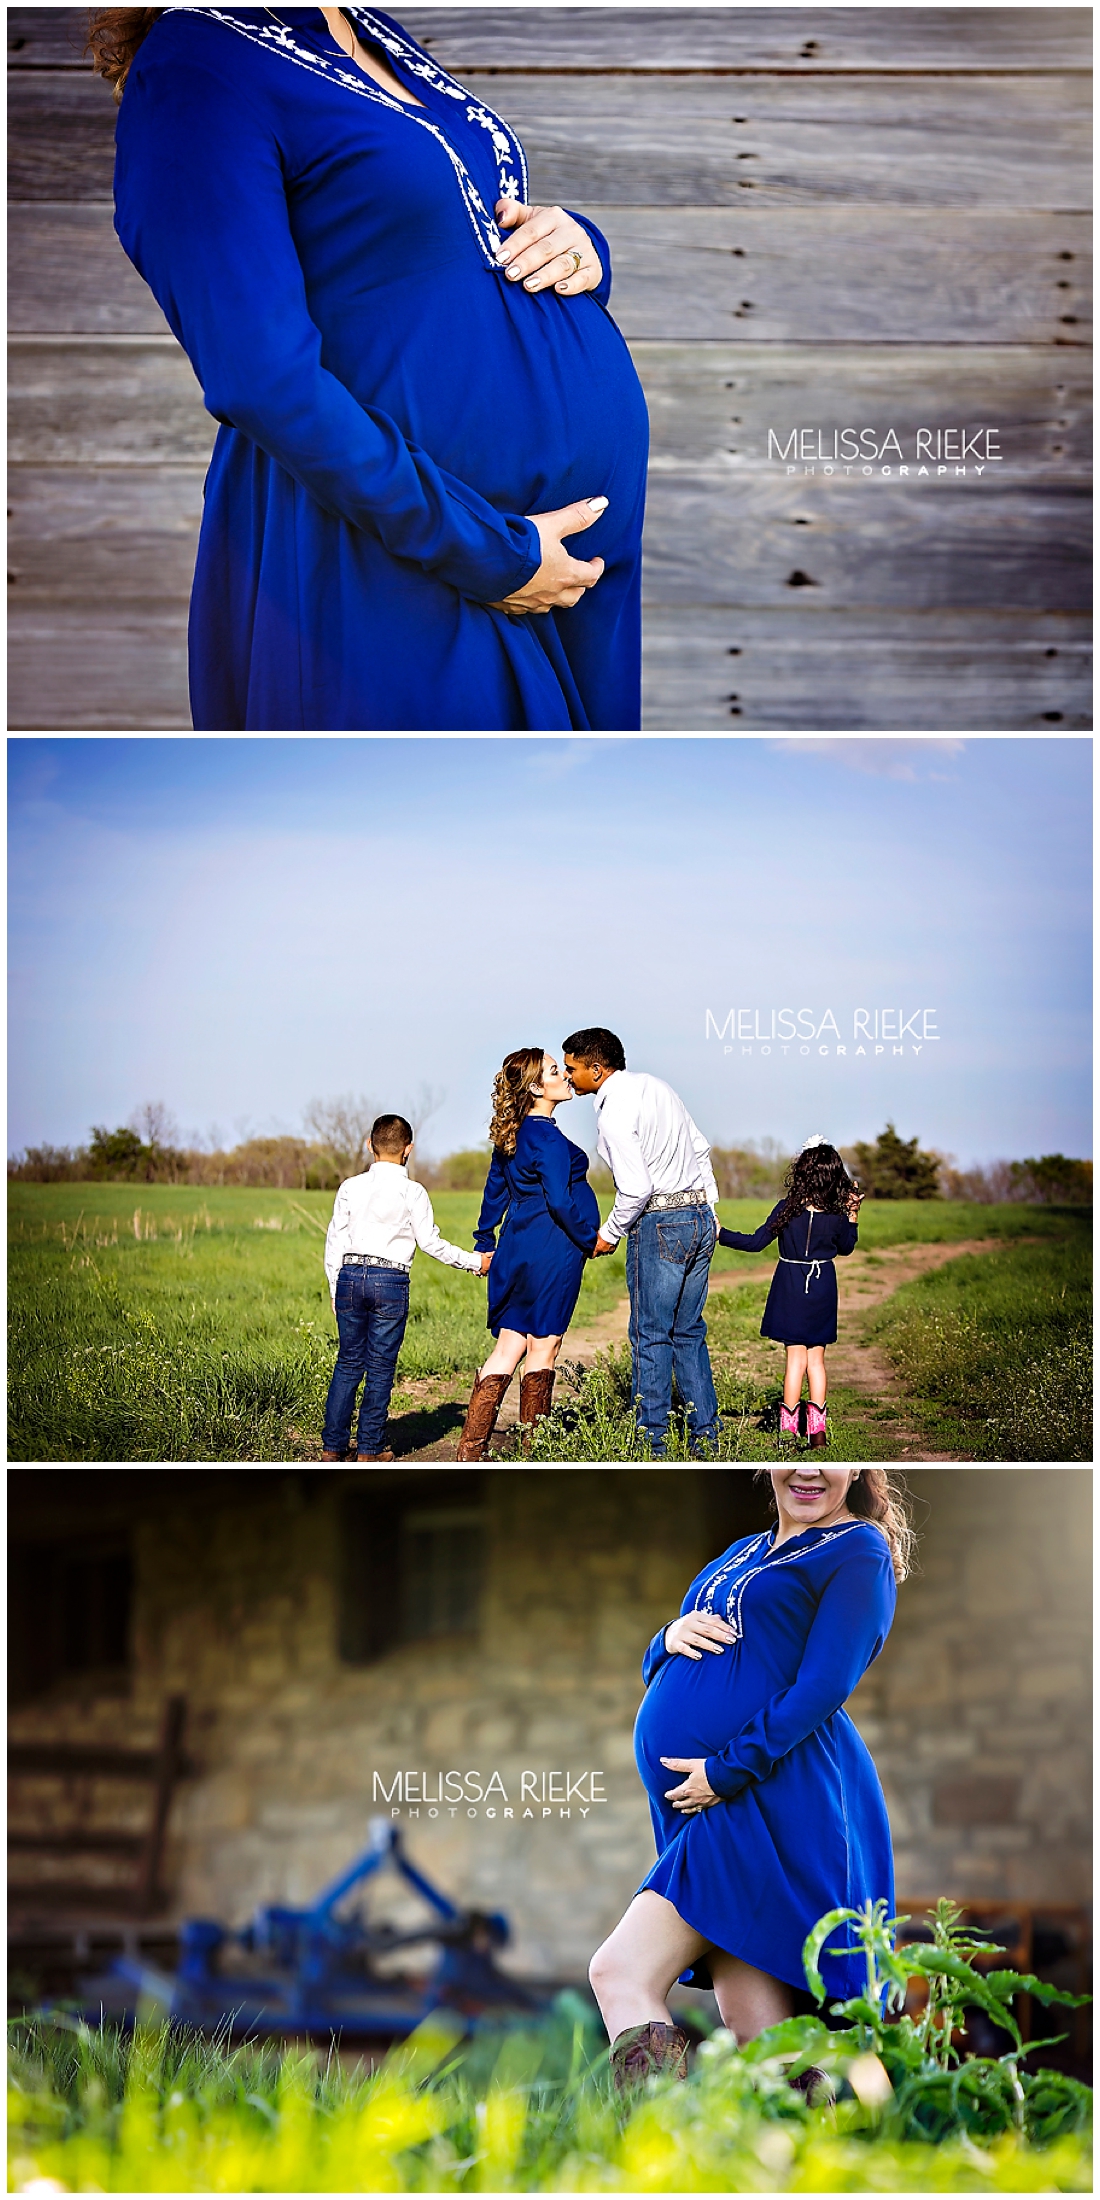 Beautiful Outdoor Farm Maternity Session Gowns Kansas City What To Wear Family Pregnancy